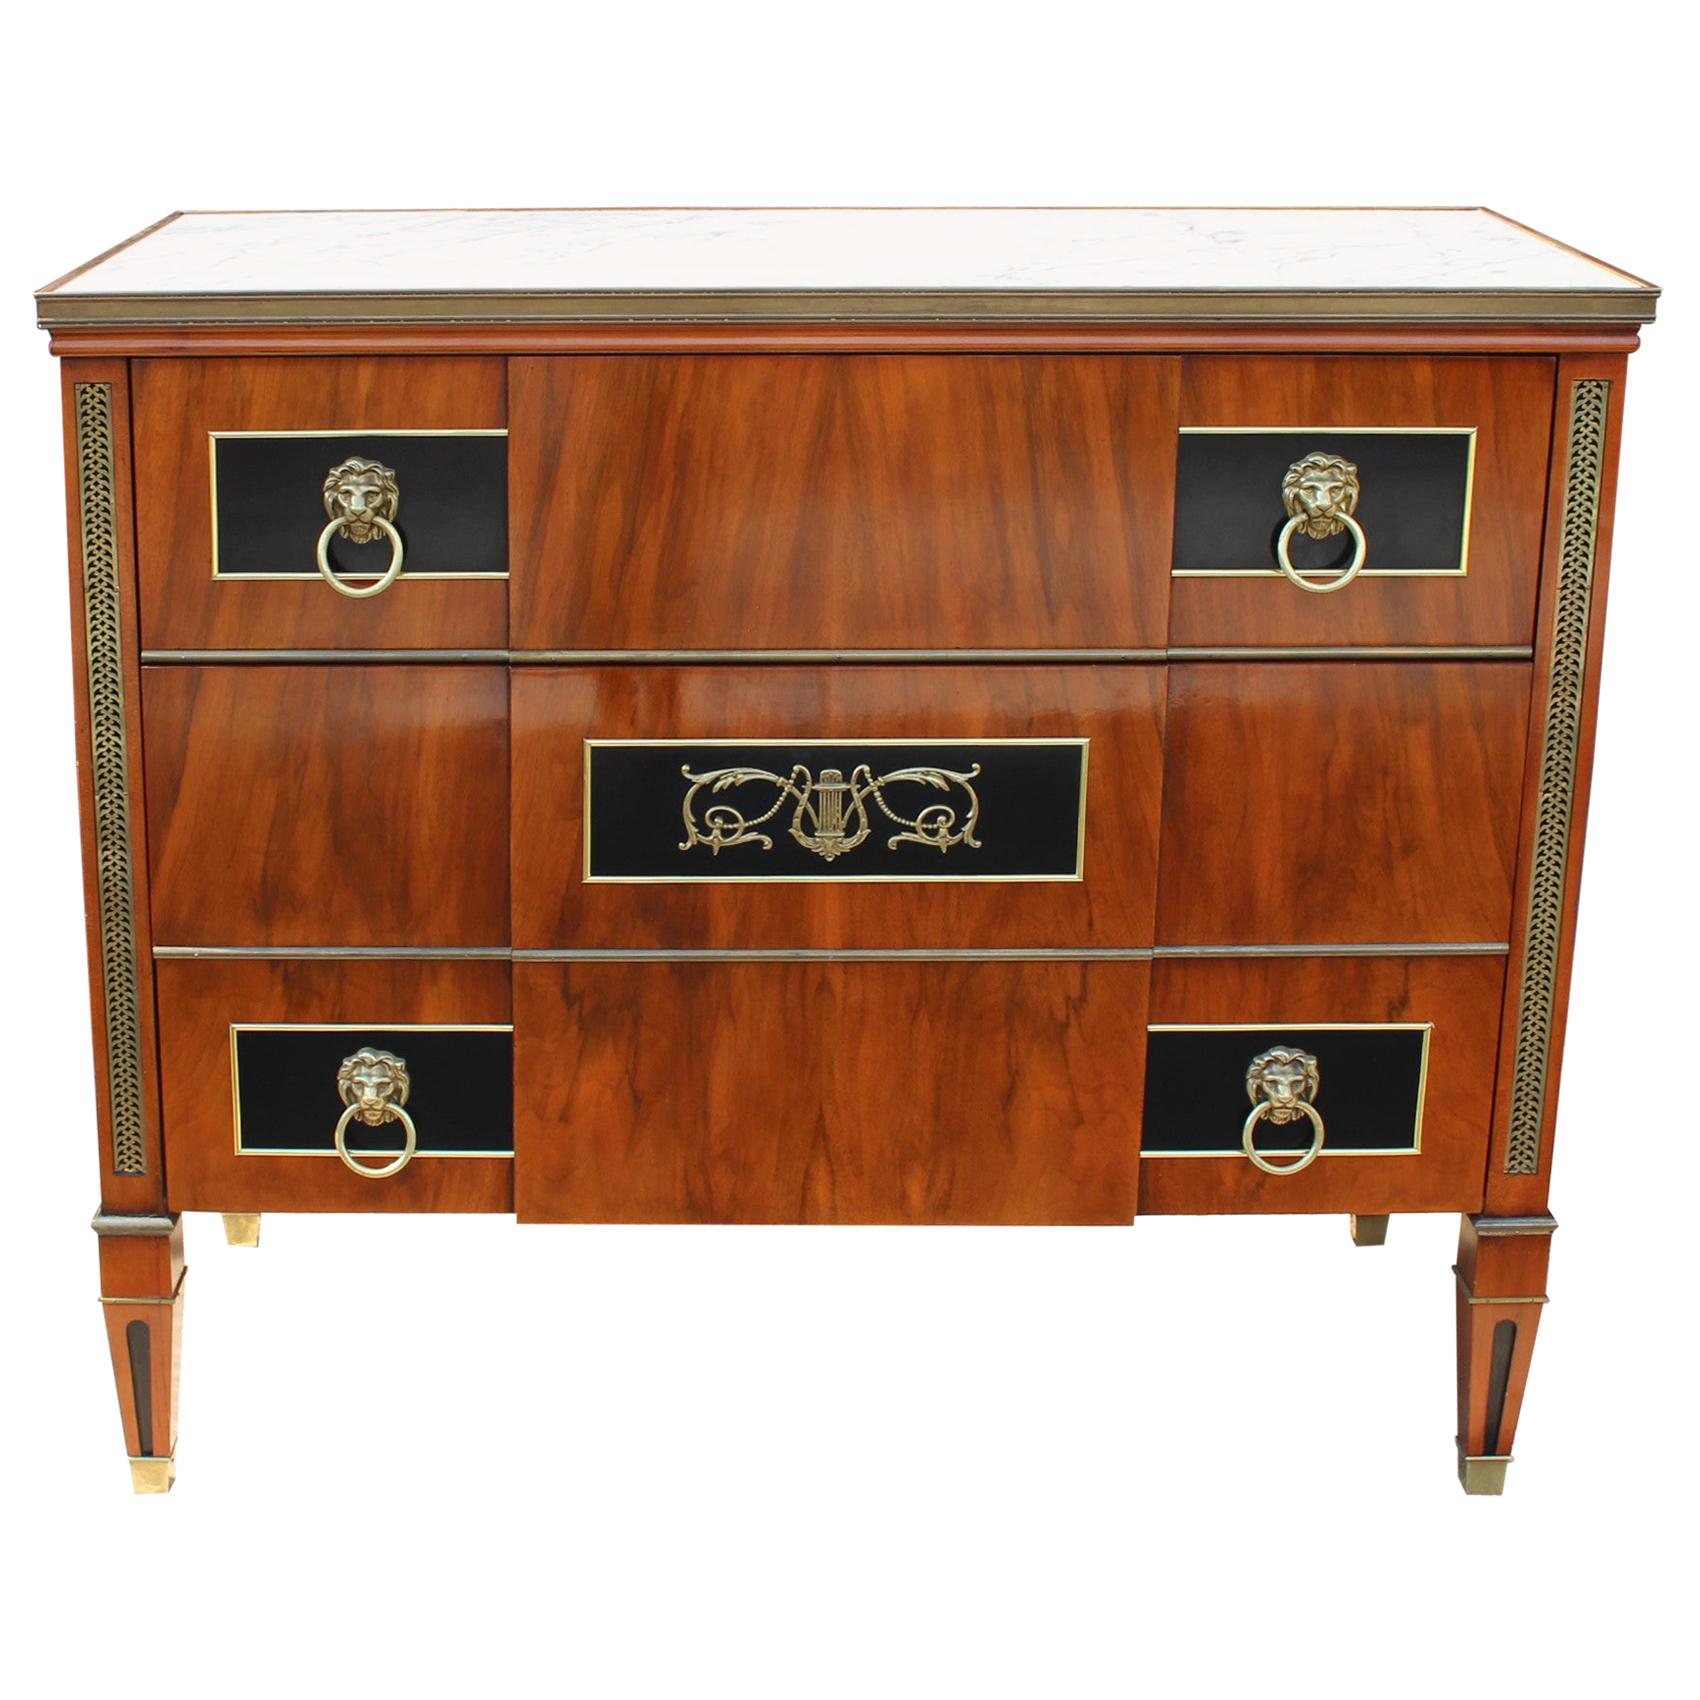 Exquisite John Widdicomb Neoclassical Chest with Marble Top